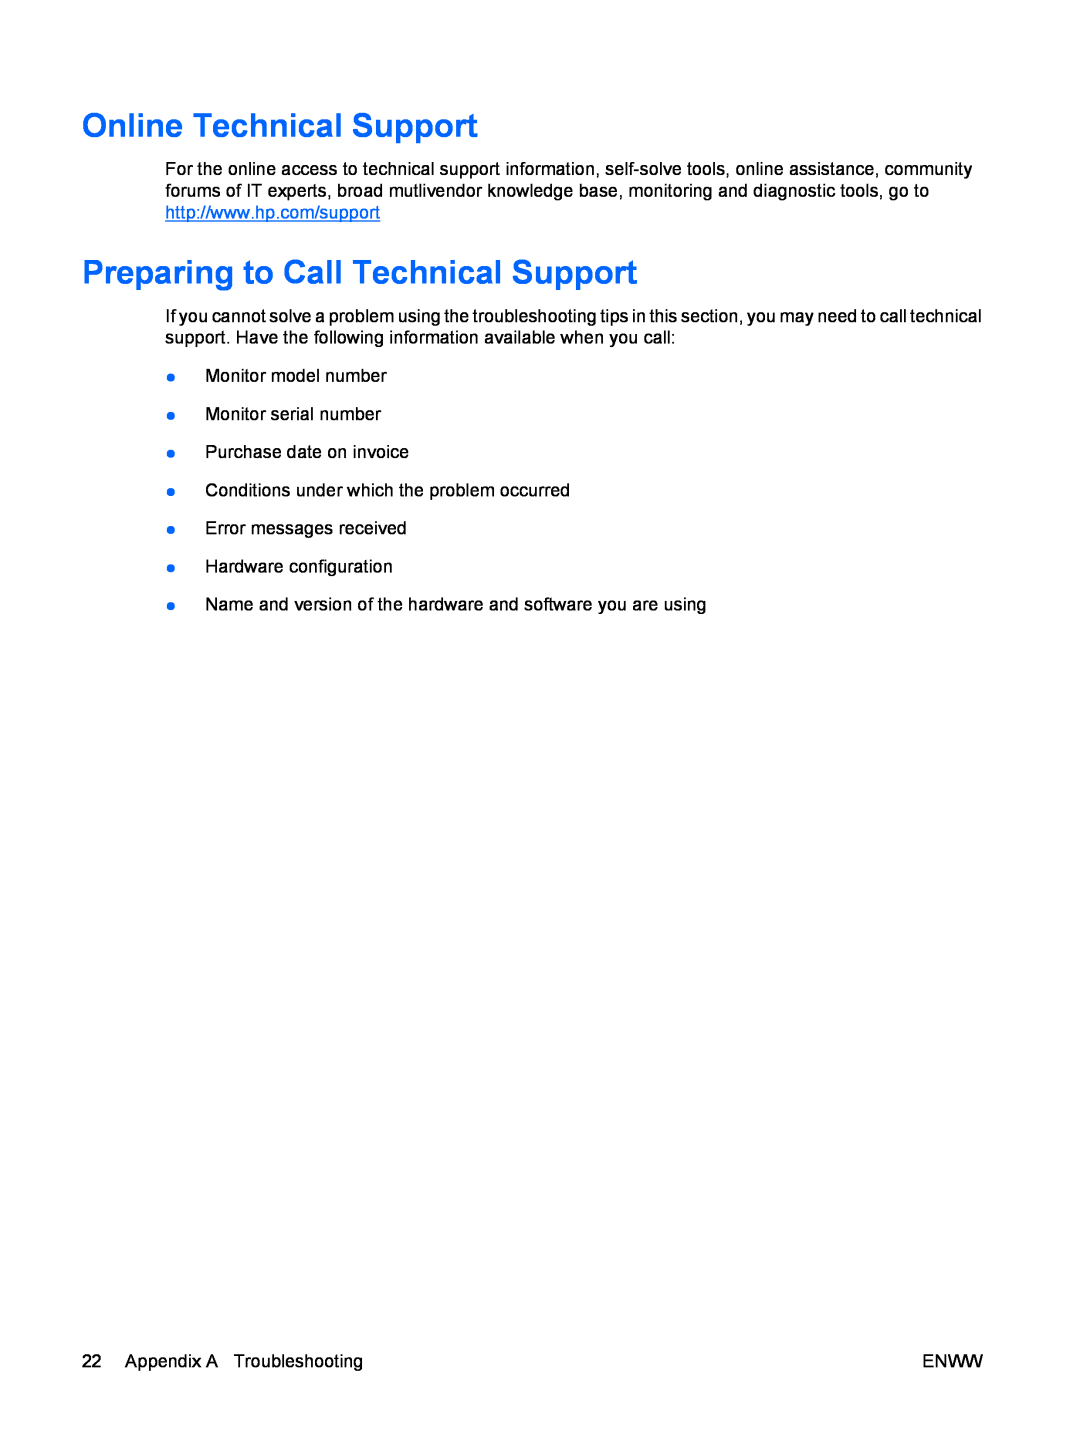 HP CQ1859E manual Online Technical Support, Preparing to Call Technical Support 